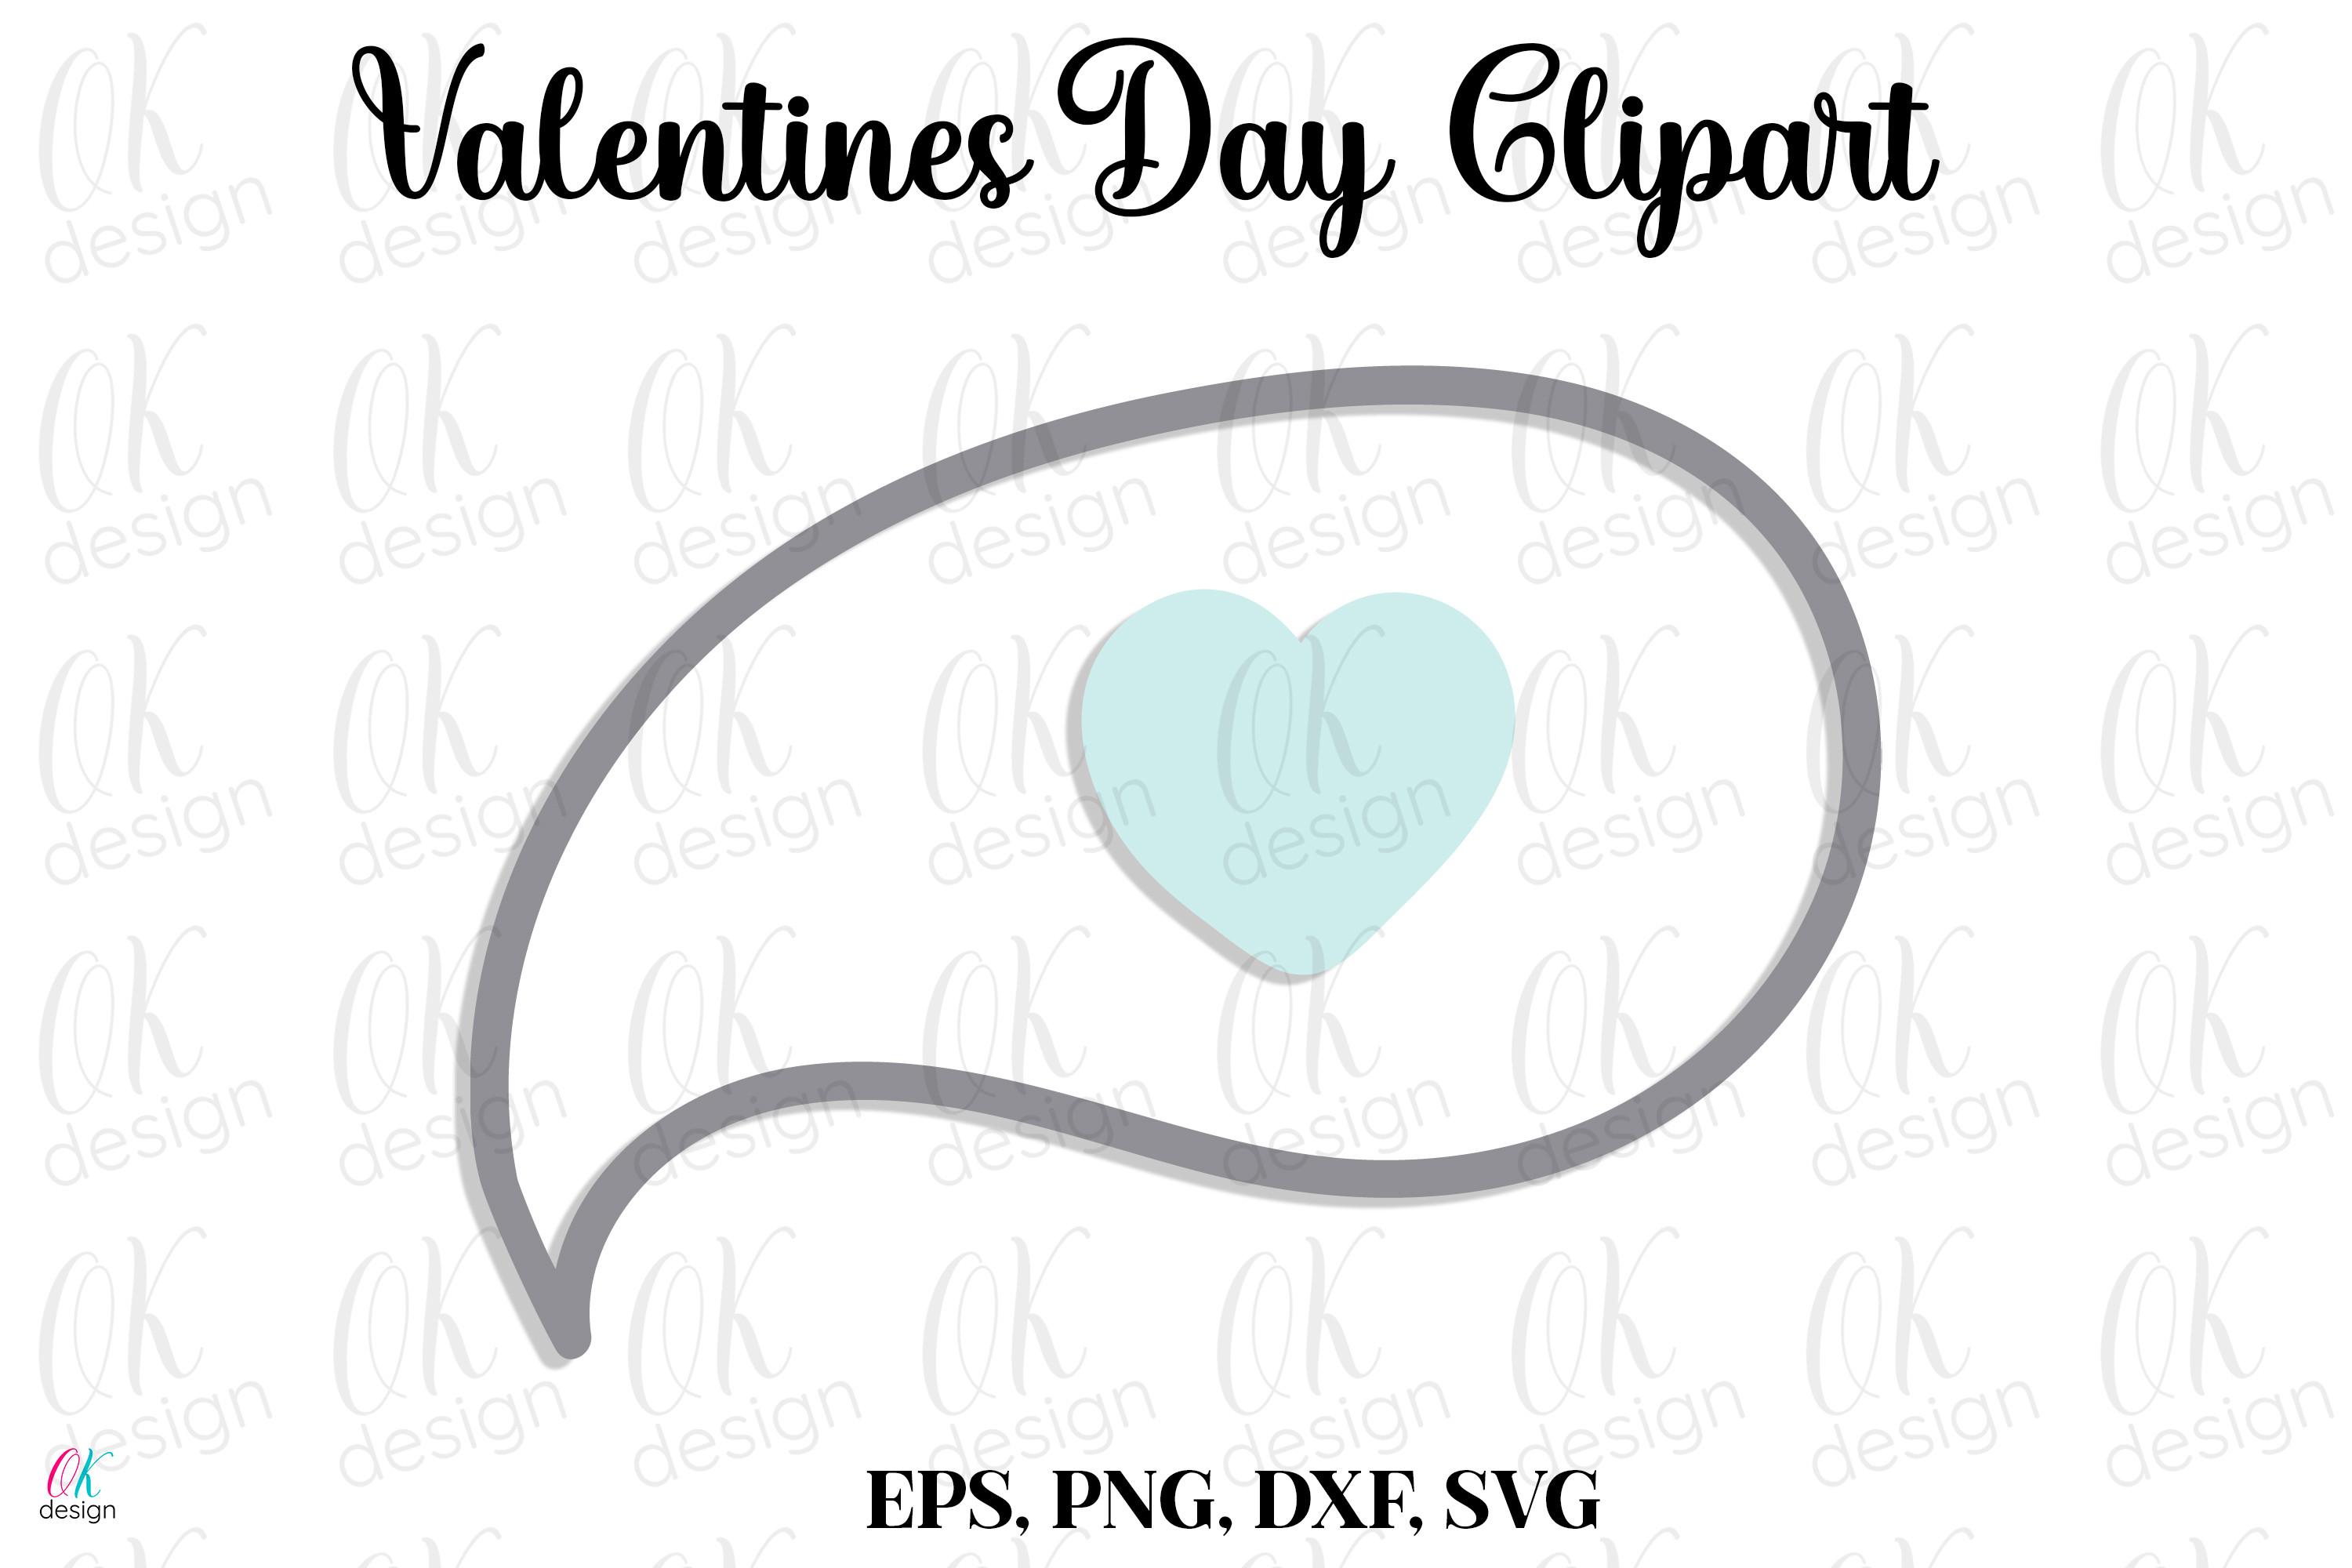 Valentines Clipart SVG, DXF, PNG Files.